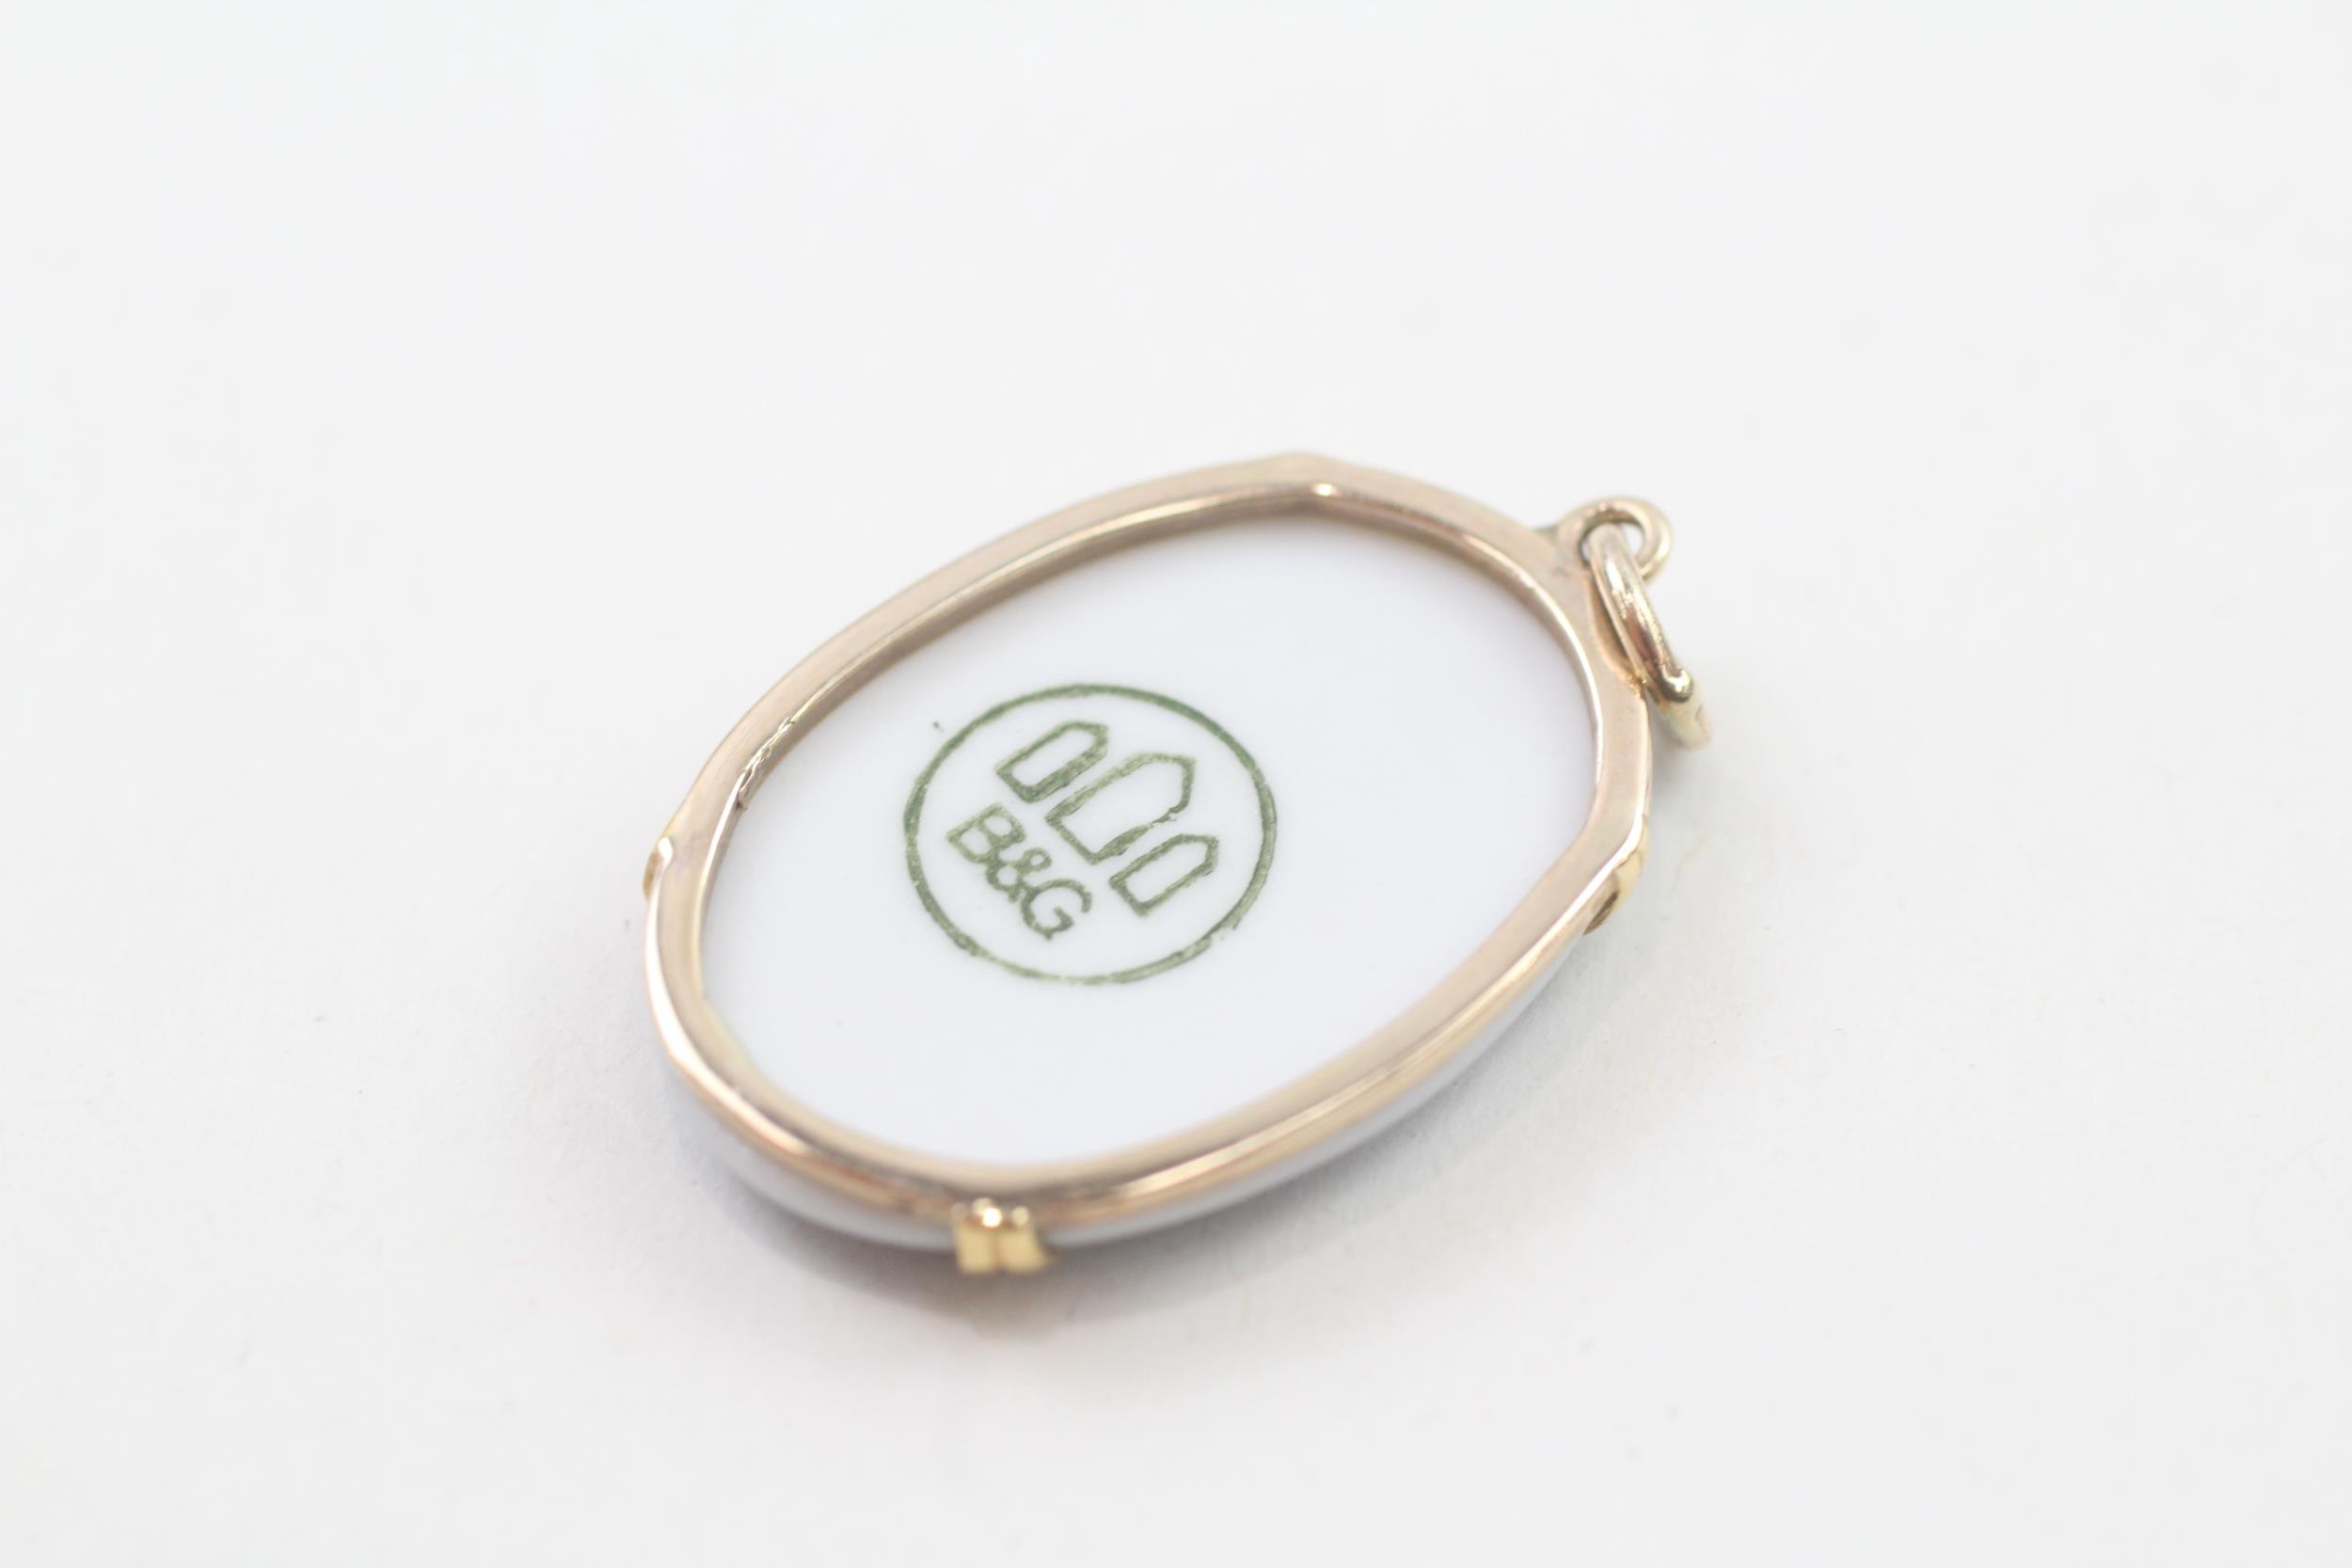 9ct gold lilly of the valley, danish porcelain pendant by Bing & Grondahl (3.2g) - Image 5 of 5